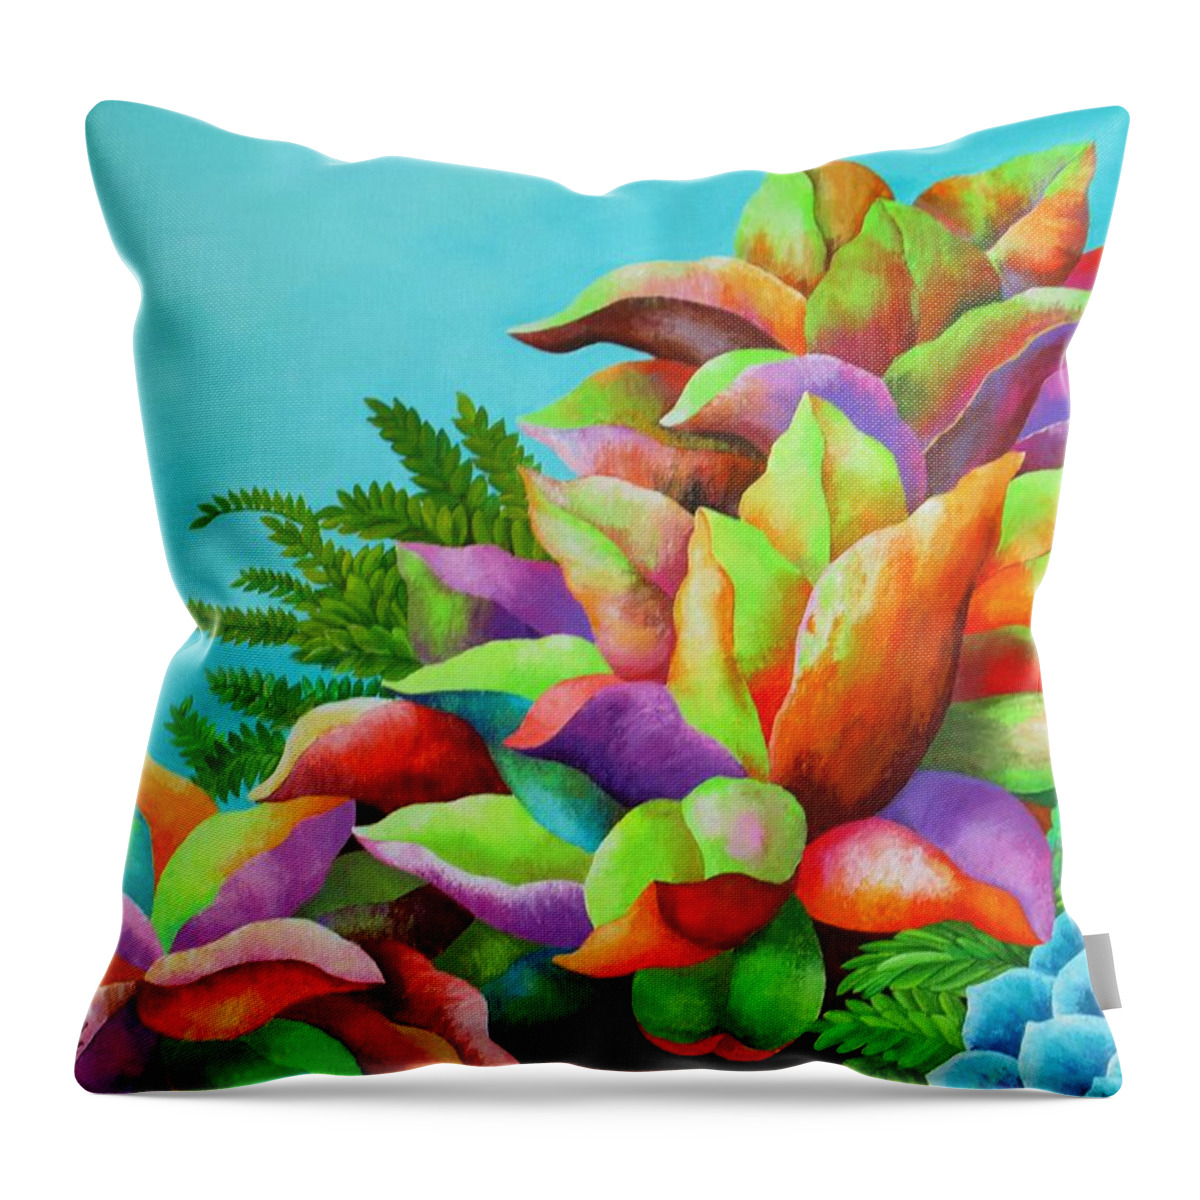 Original Throw Pillow featuring the painting Summer Succulents by Carol Sabo